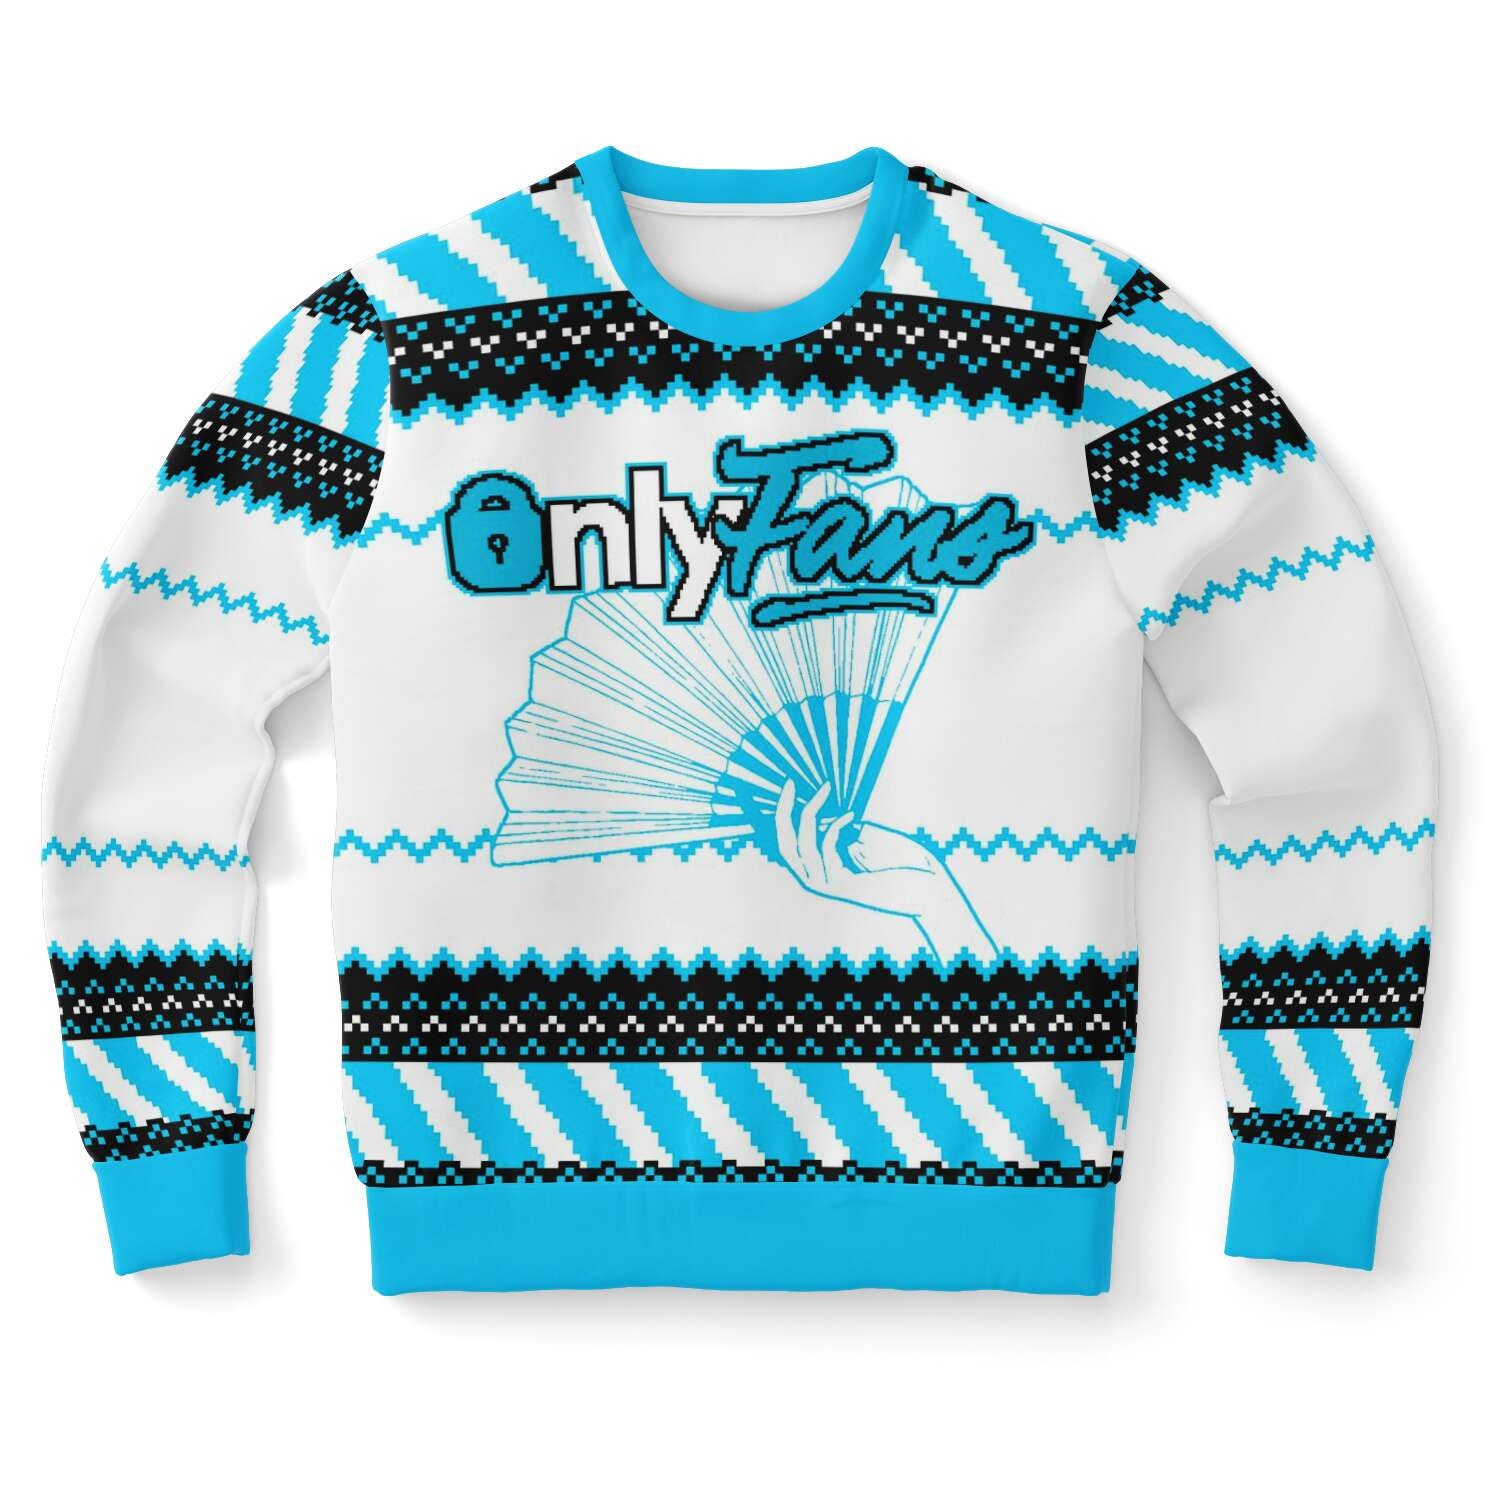 2022 ONLY HAND FANS ugly christmas sweater